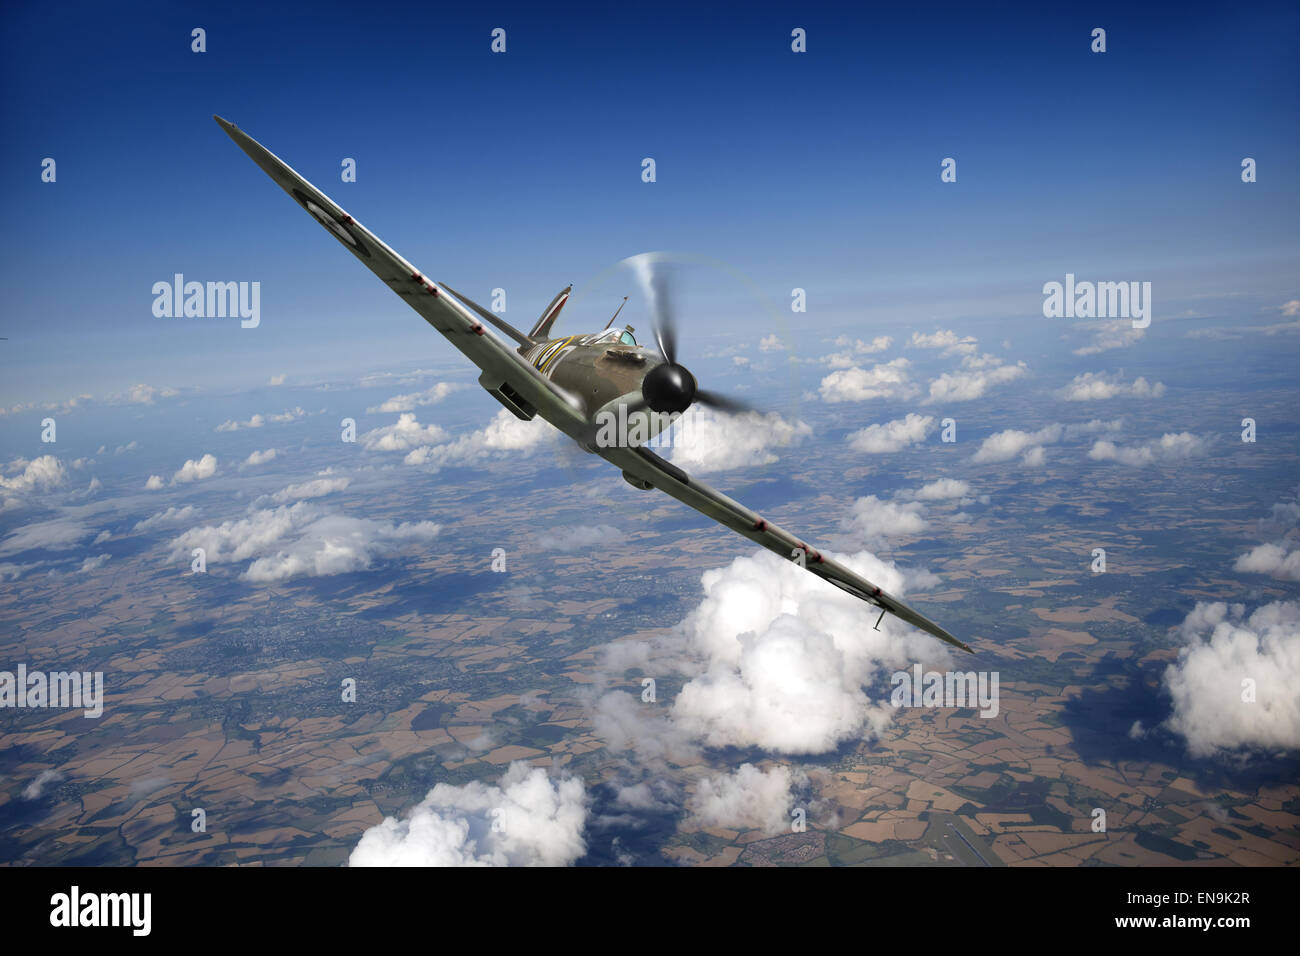 A classic RAF Supermarine Spitfire Mk I fighter in Battle of Britain markings from August 1940. Stock Photo